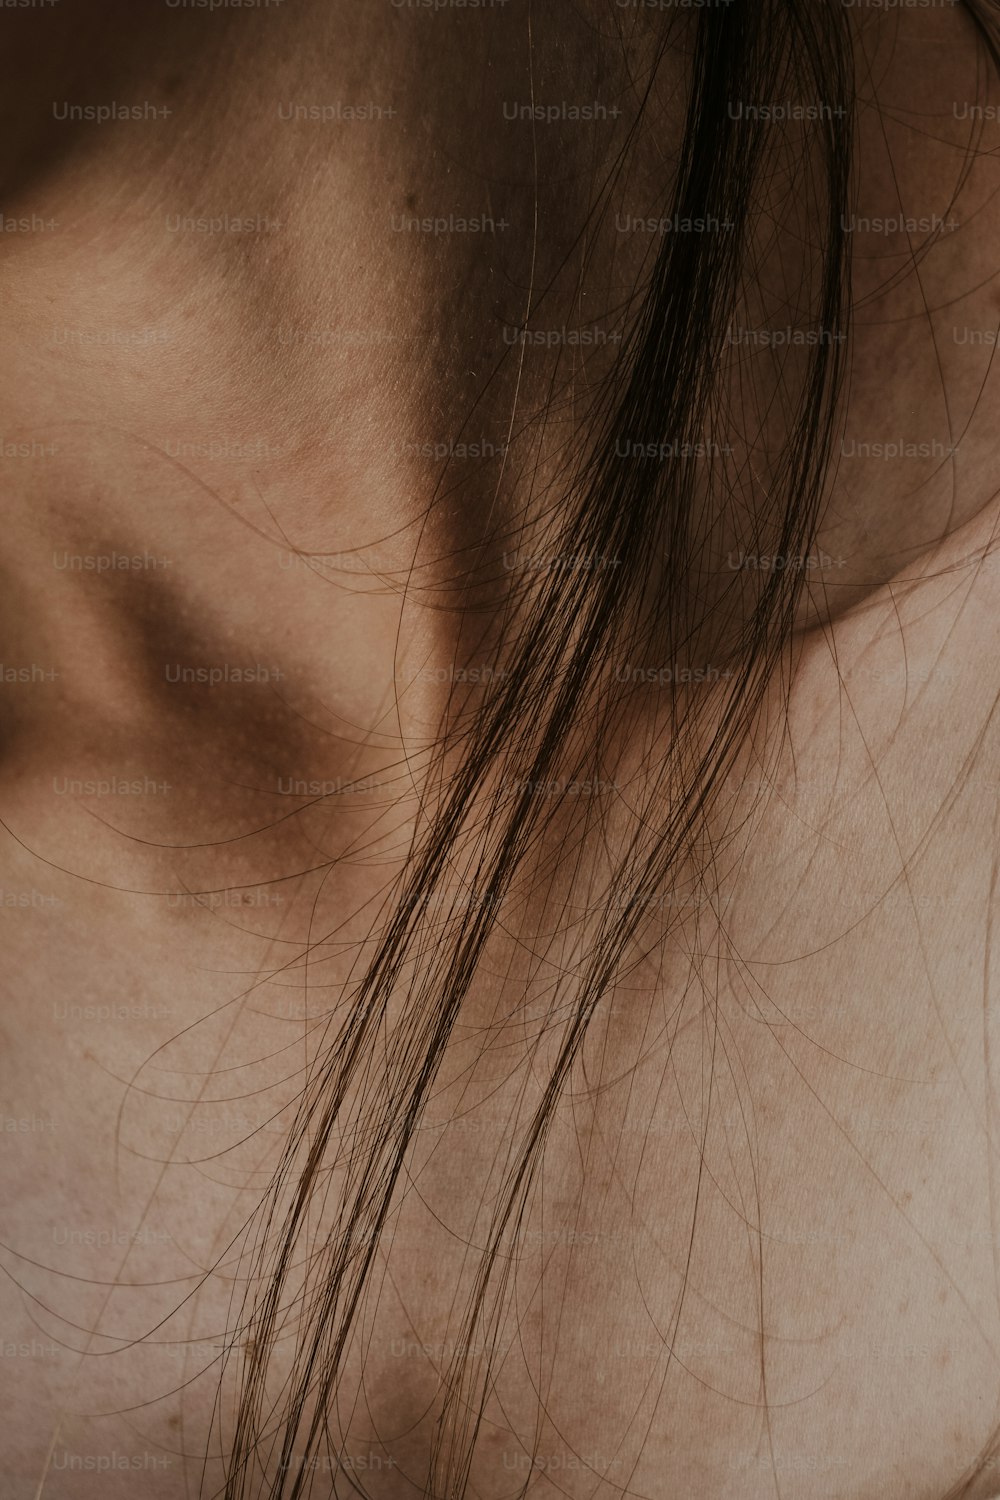 a close up of a person's hair and neck